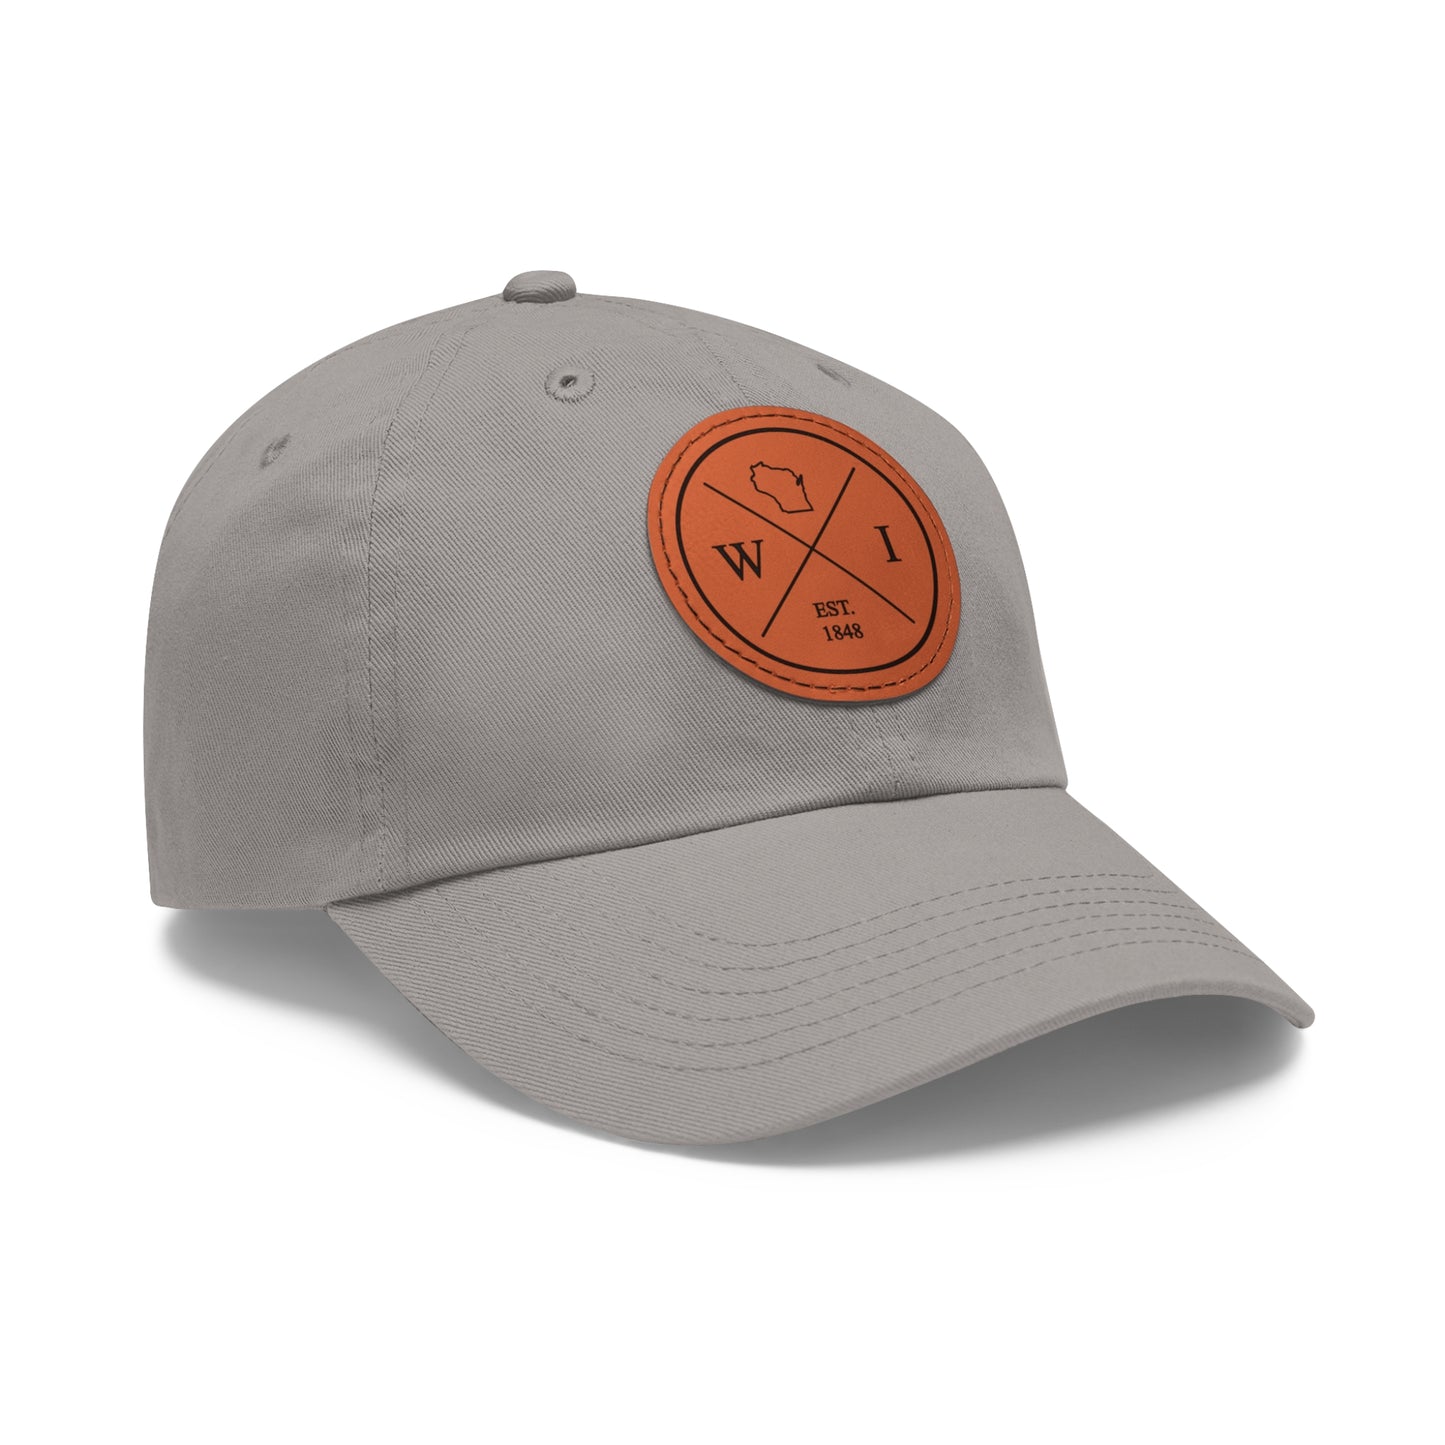 Wisconsin Dad Hat with Leather Patch